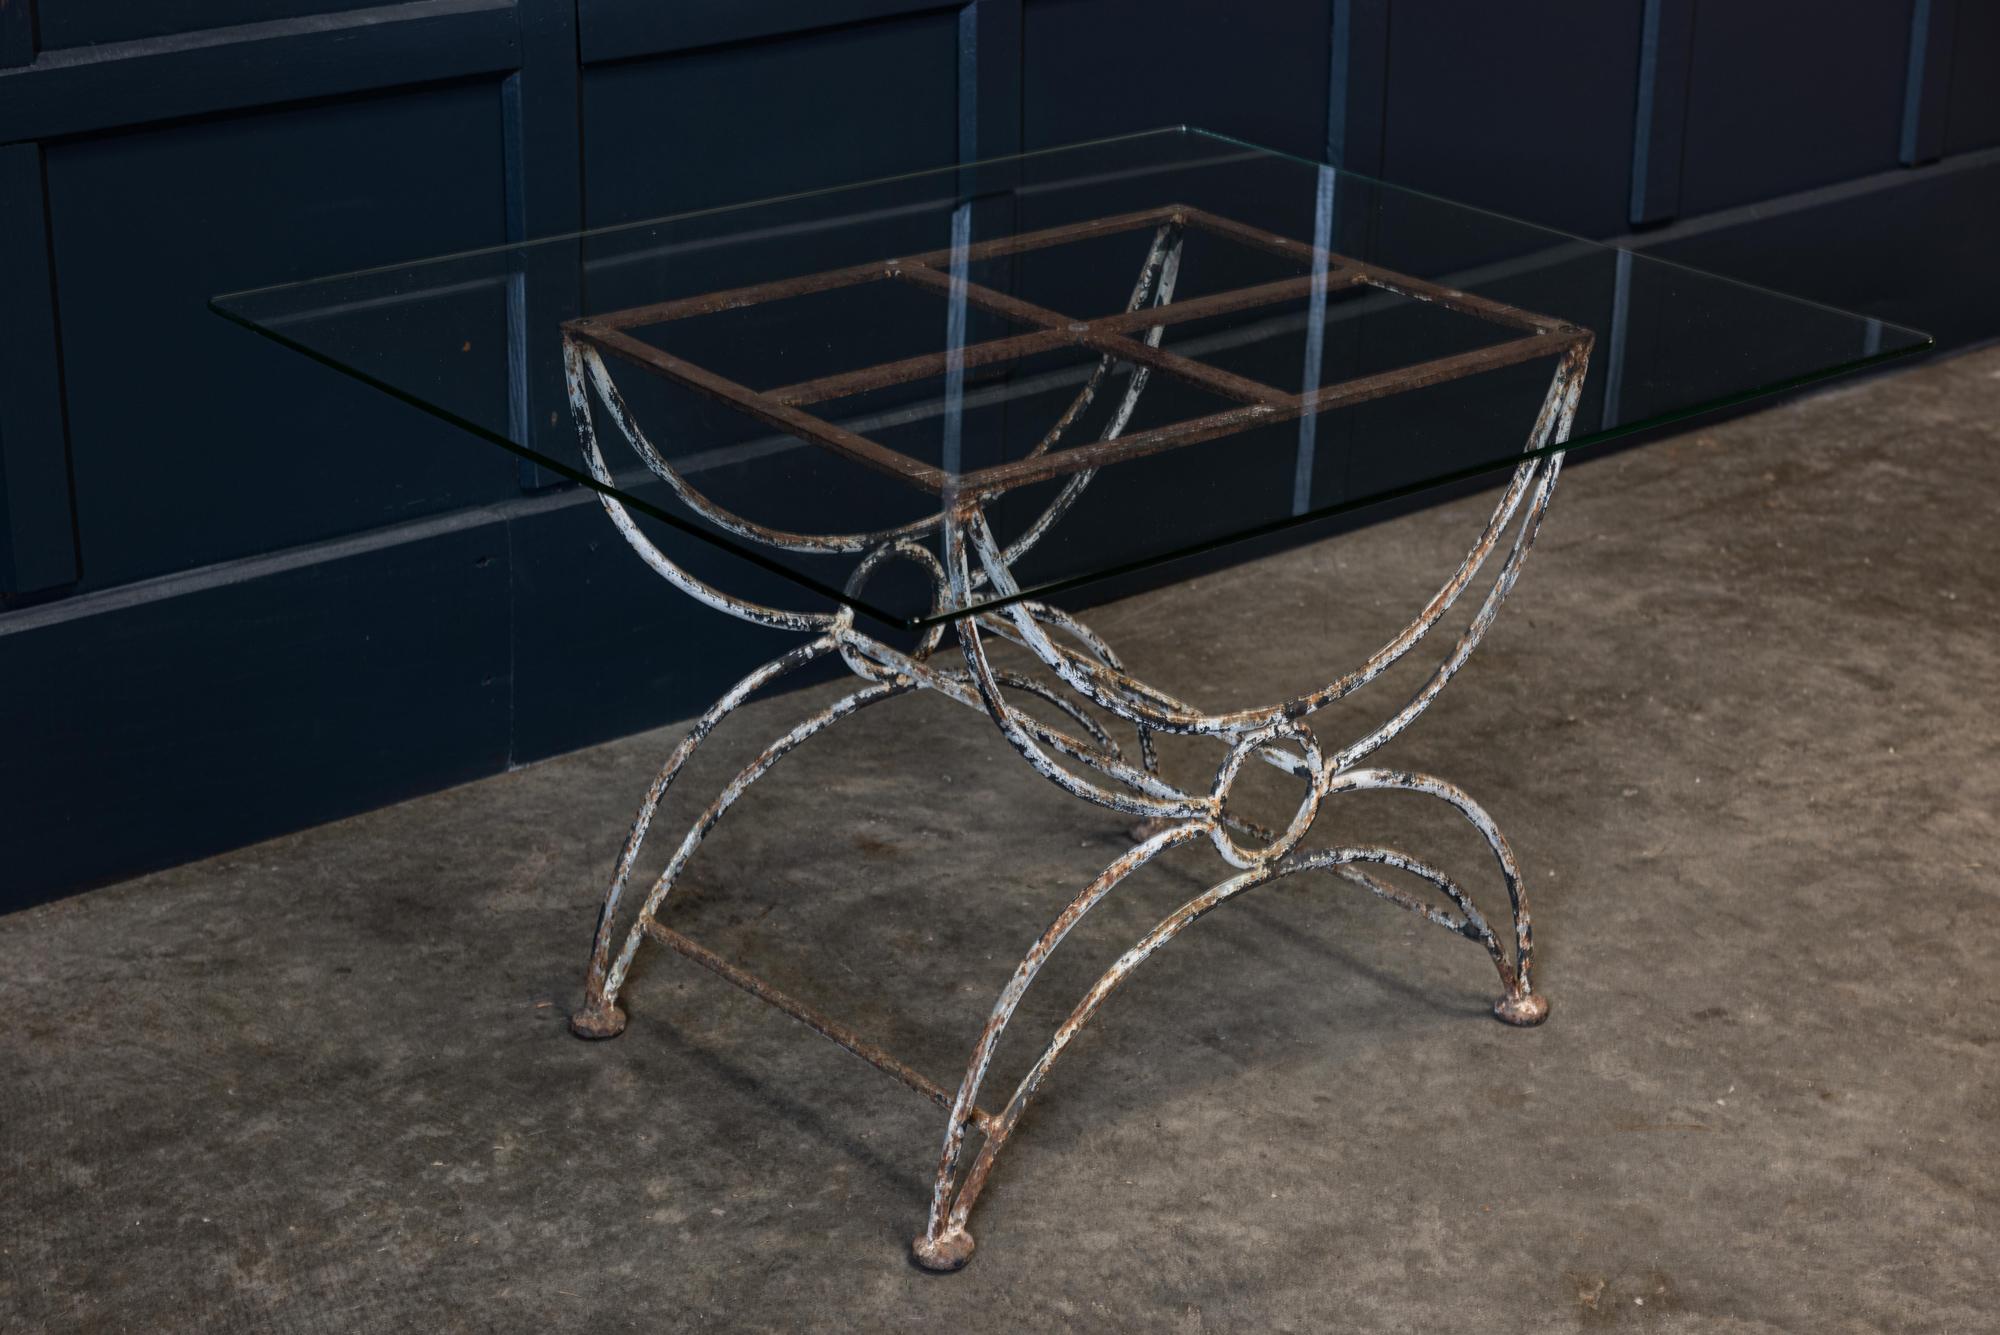 English painted wrought iron and glass coffee, side table,
circa 1930.

Painted wrought iron and glass coffee or side table. New toughened glass top on shaped wrought Iron legs.

Measures: W 80 x D 66.5 x H 46cm.